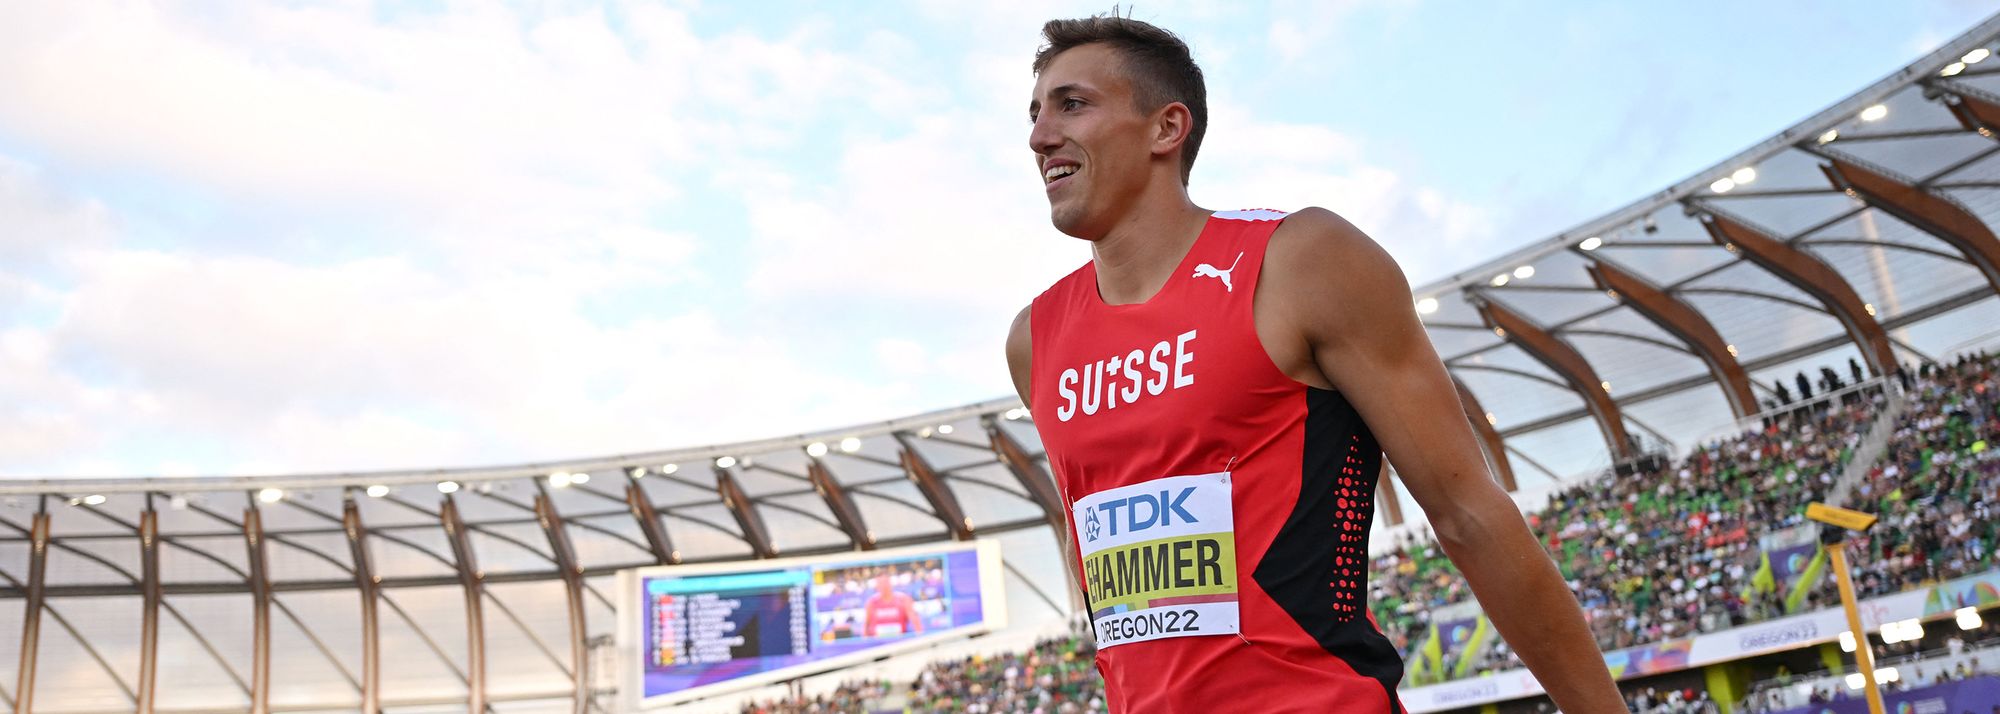 On his way to heptathlon silver at the World Indoor Championships in March, Swiss decathlete Simon Ehammer looked longingly at the long jump competition taking place a few metres away